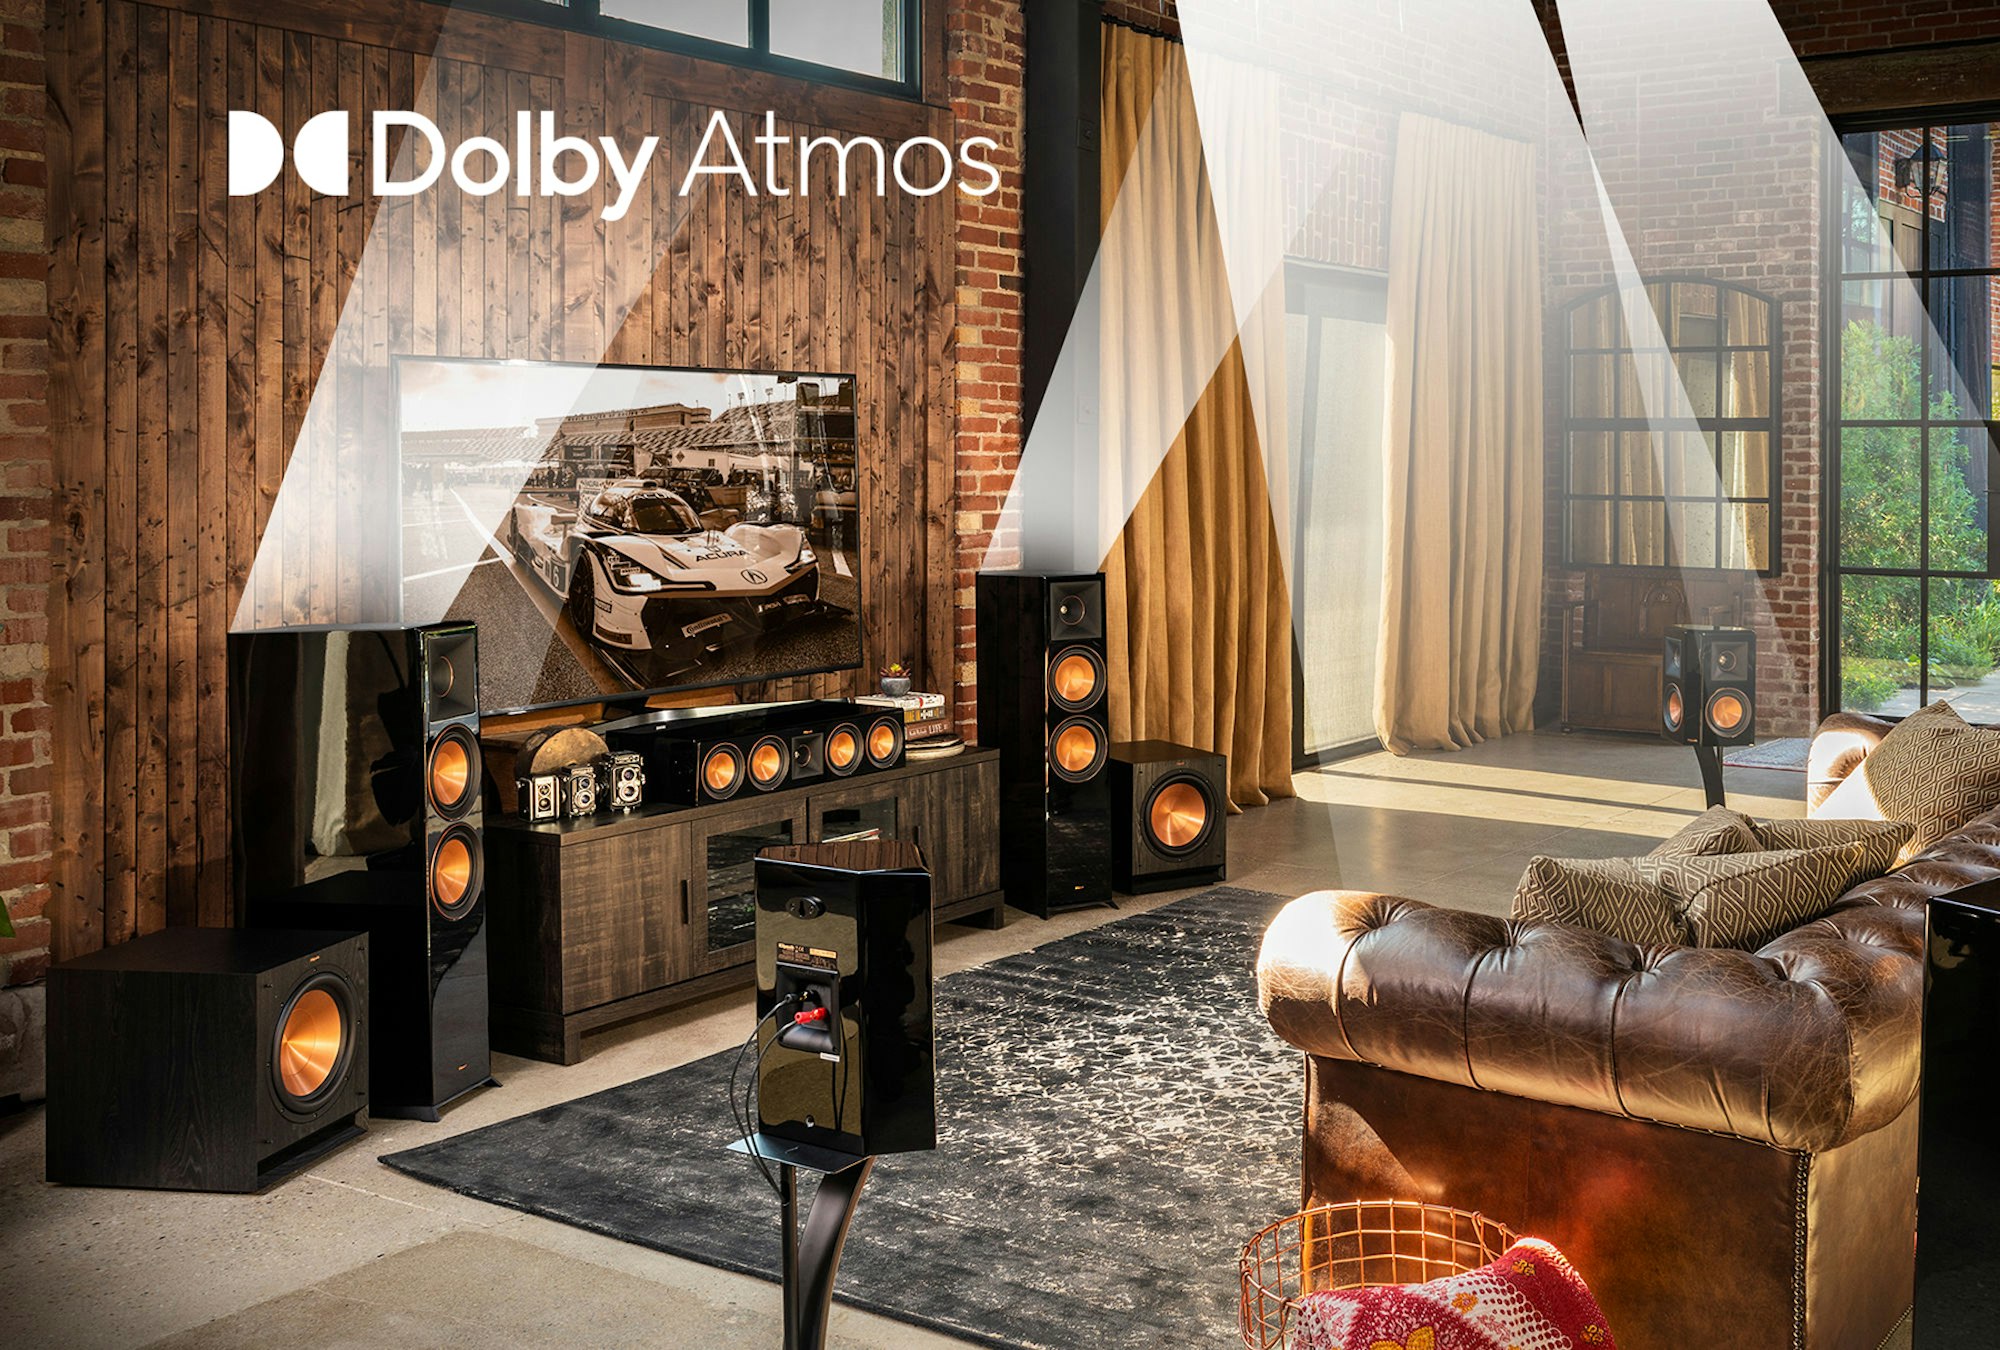 Klipsch Dolby Atmos best home theater speakers